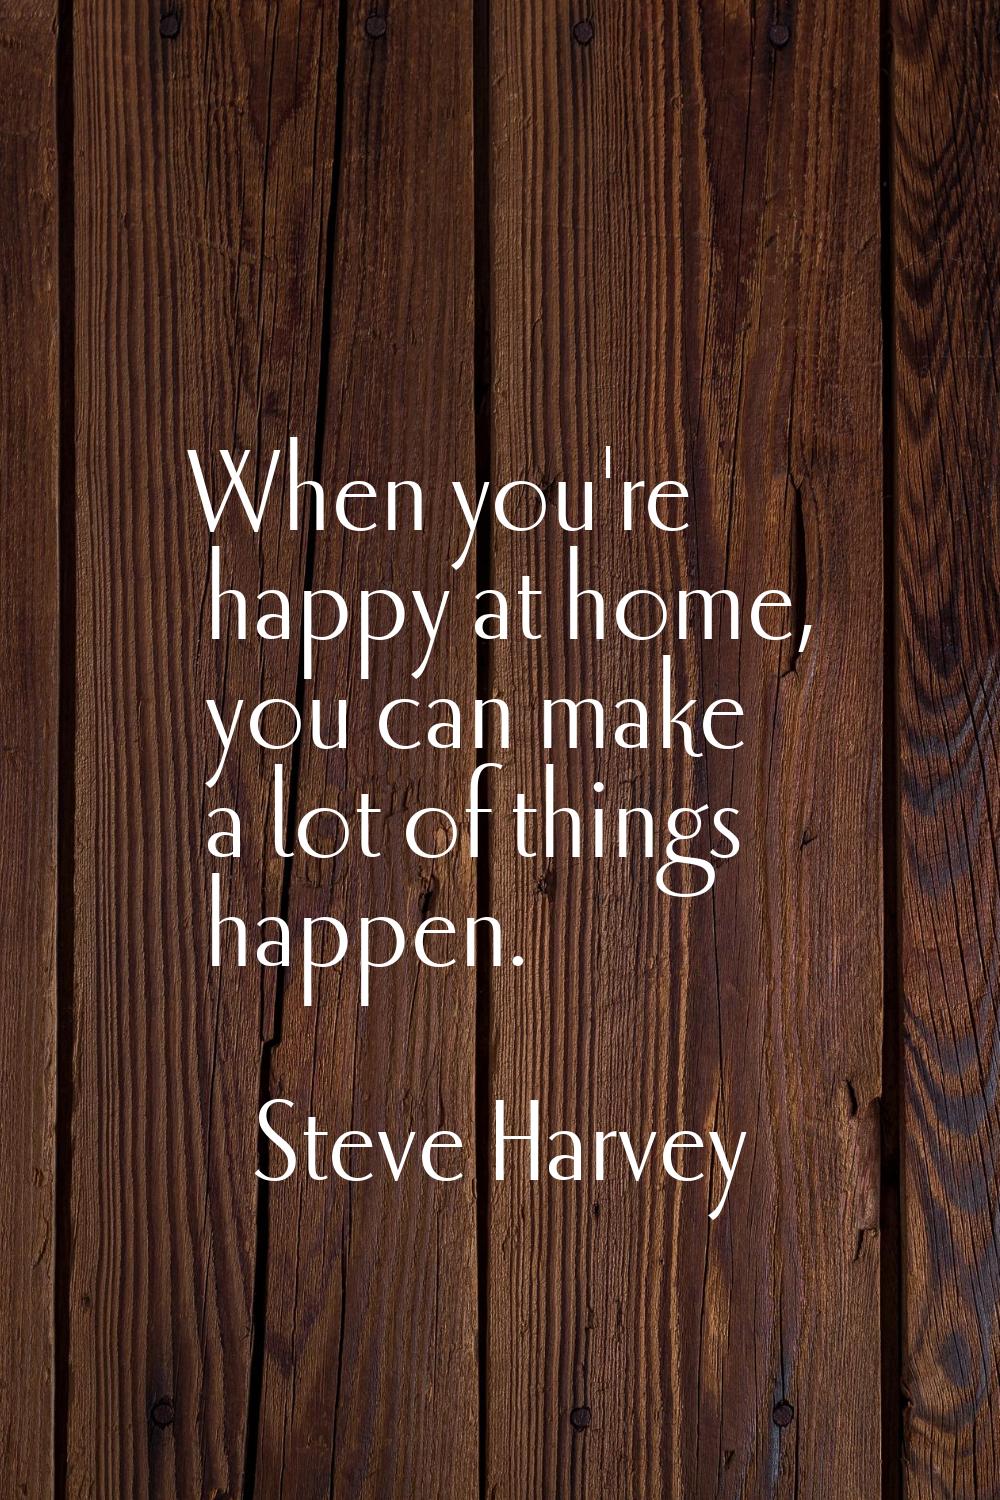 When you're happy at home, you can make a lot of things happen.